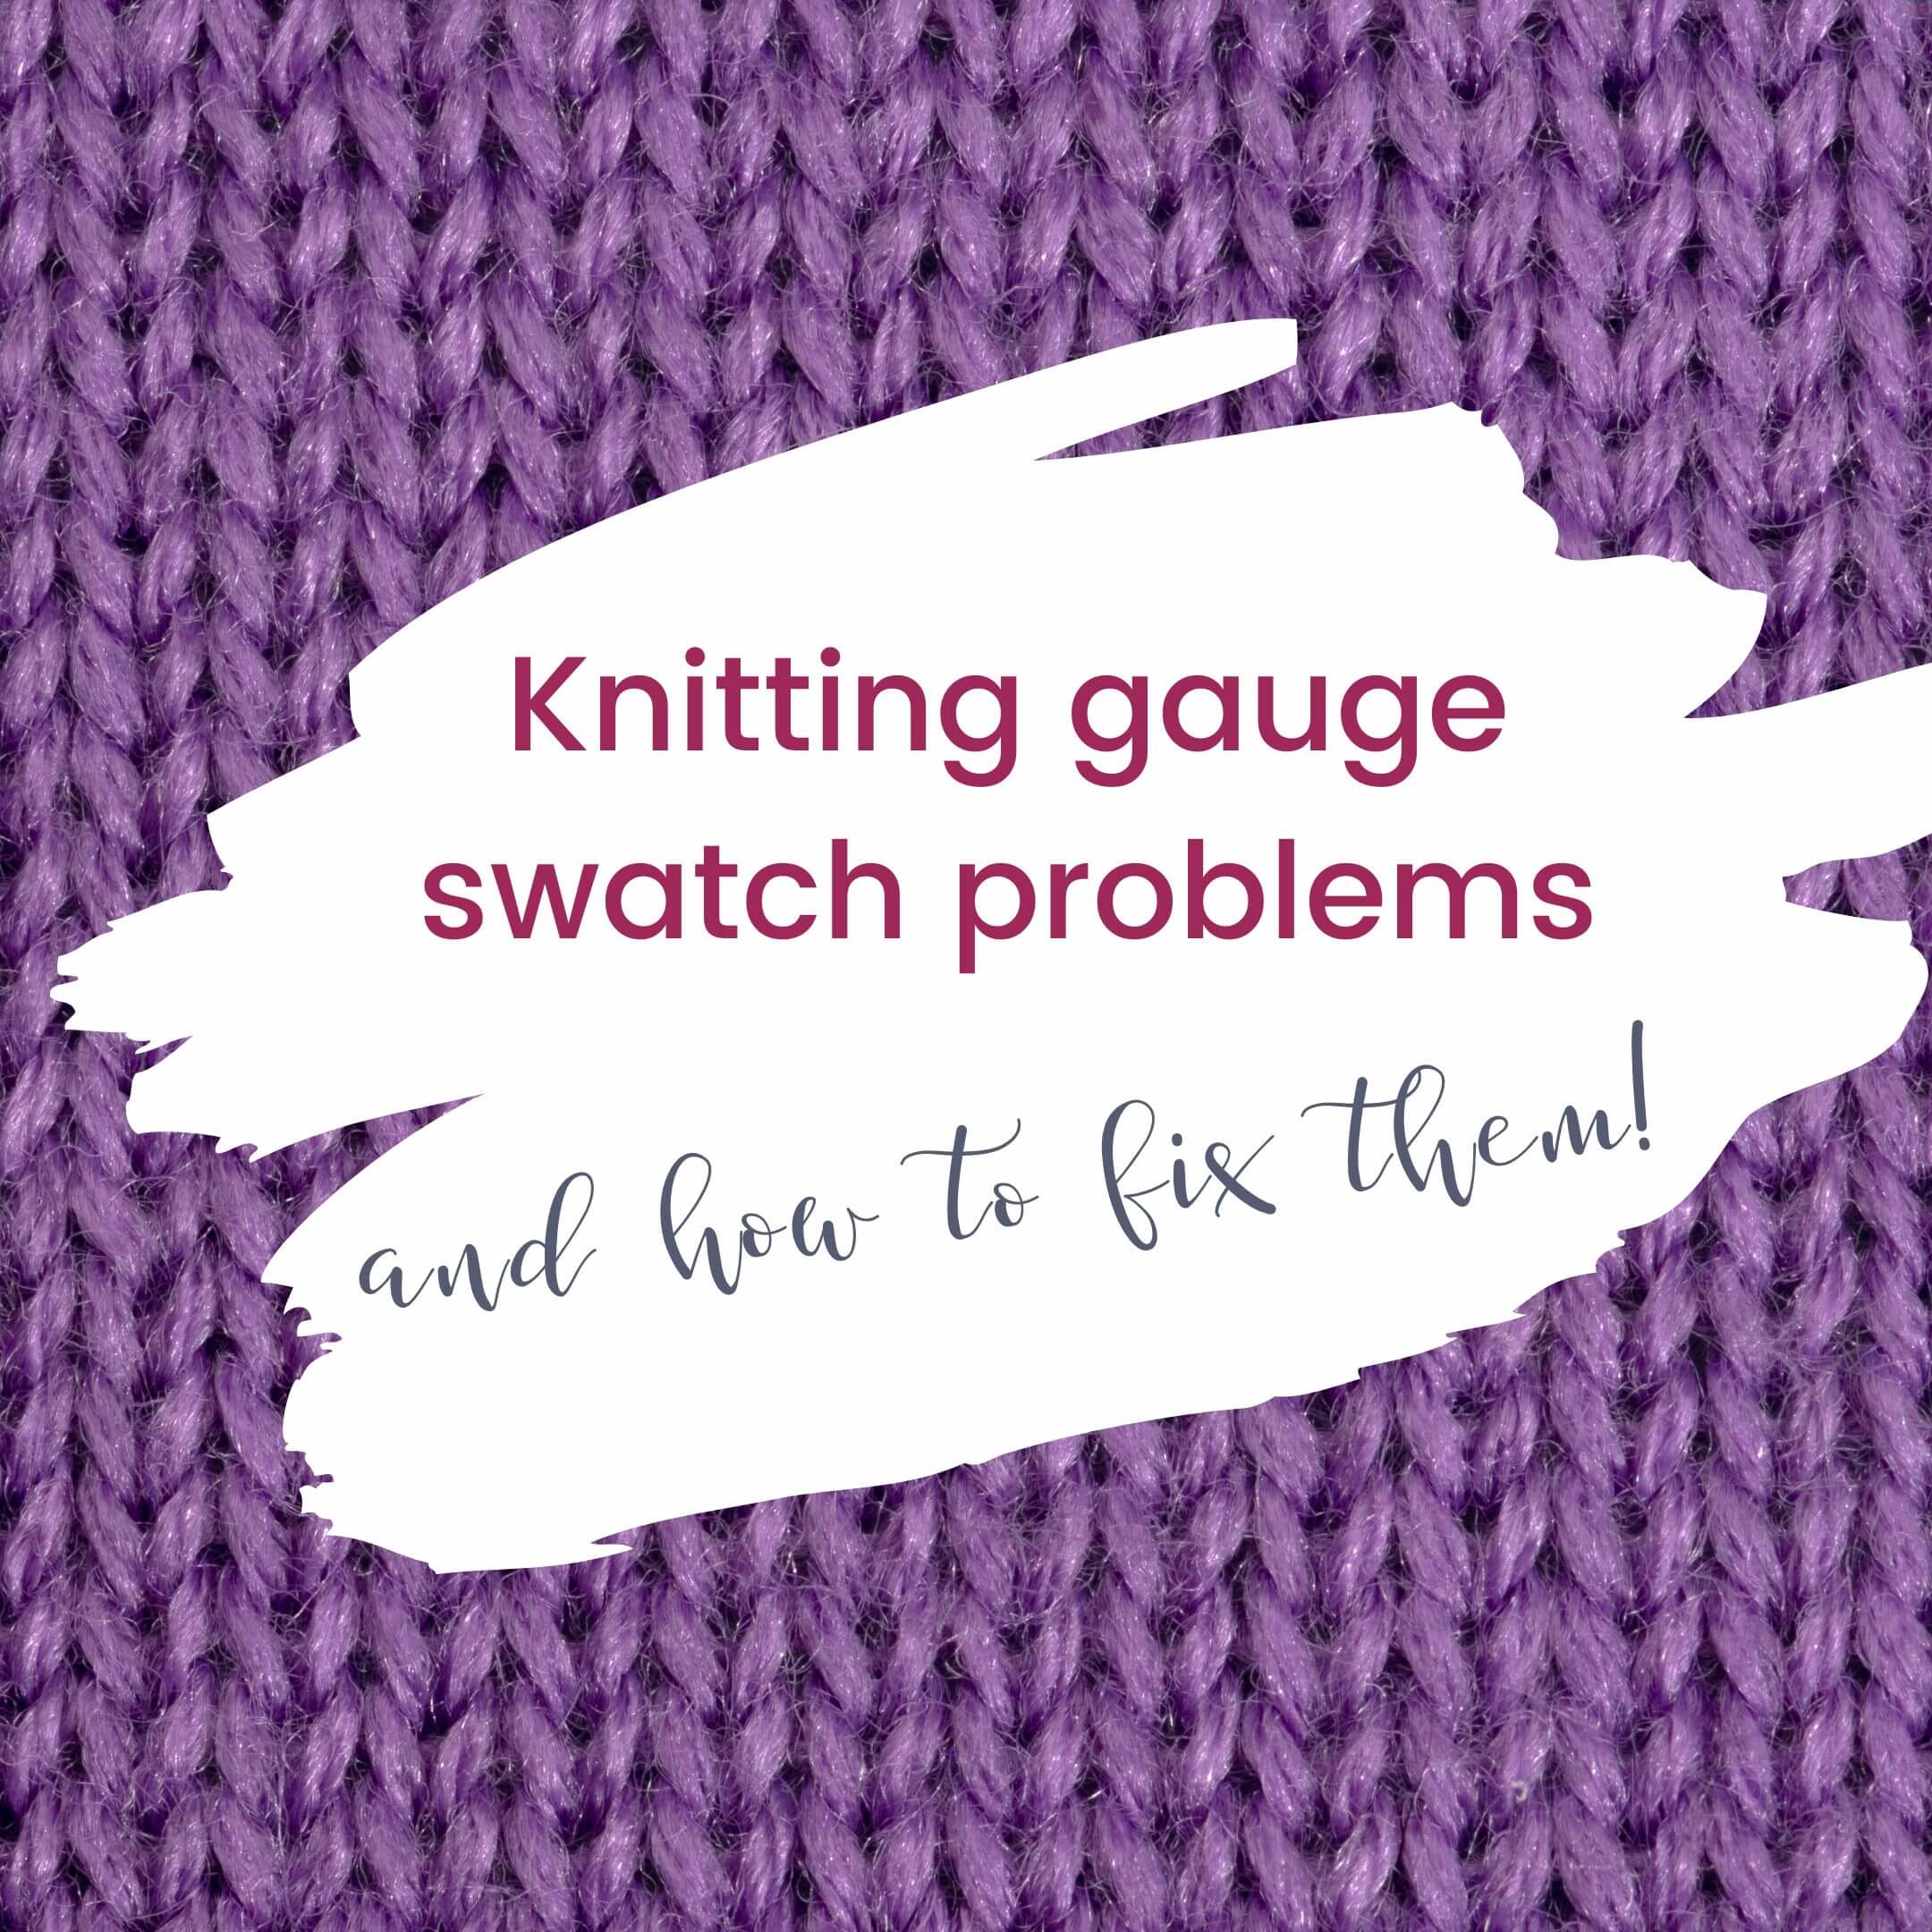 knitting gauge swatch problems and how to fix them